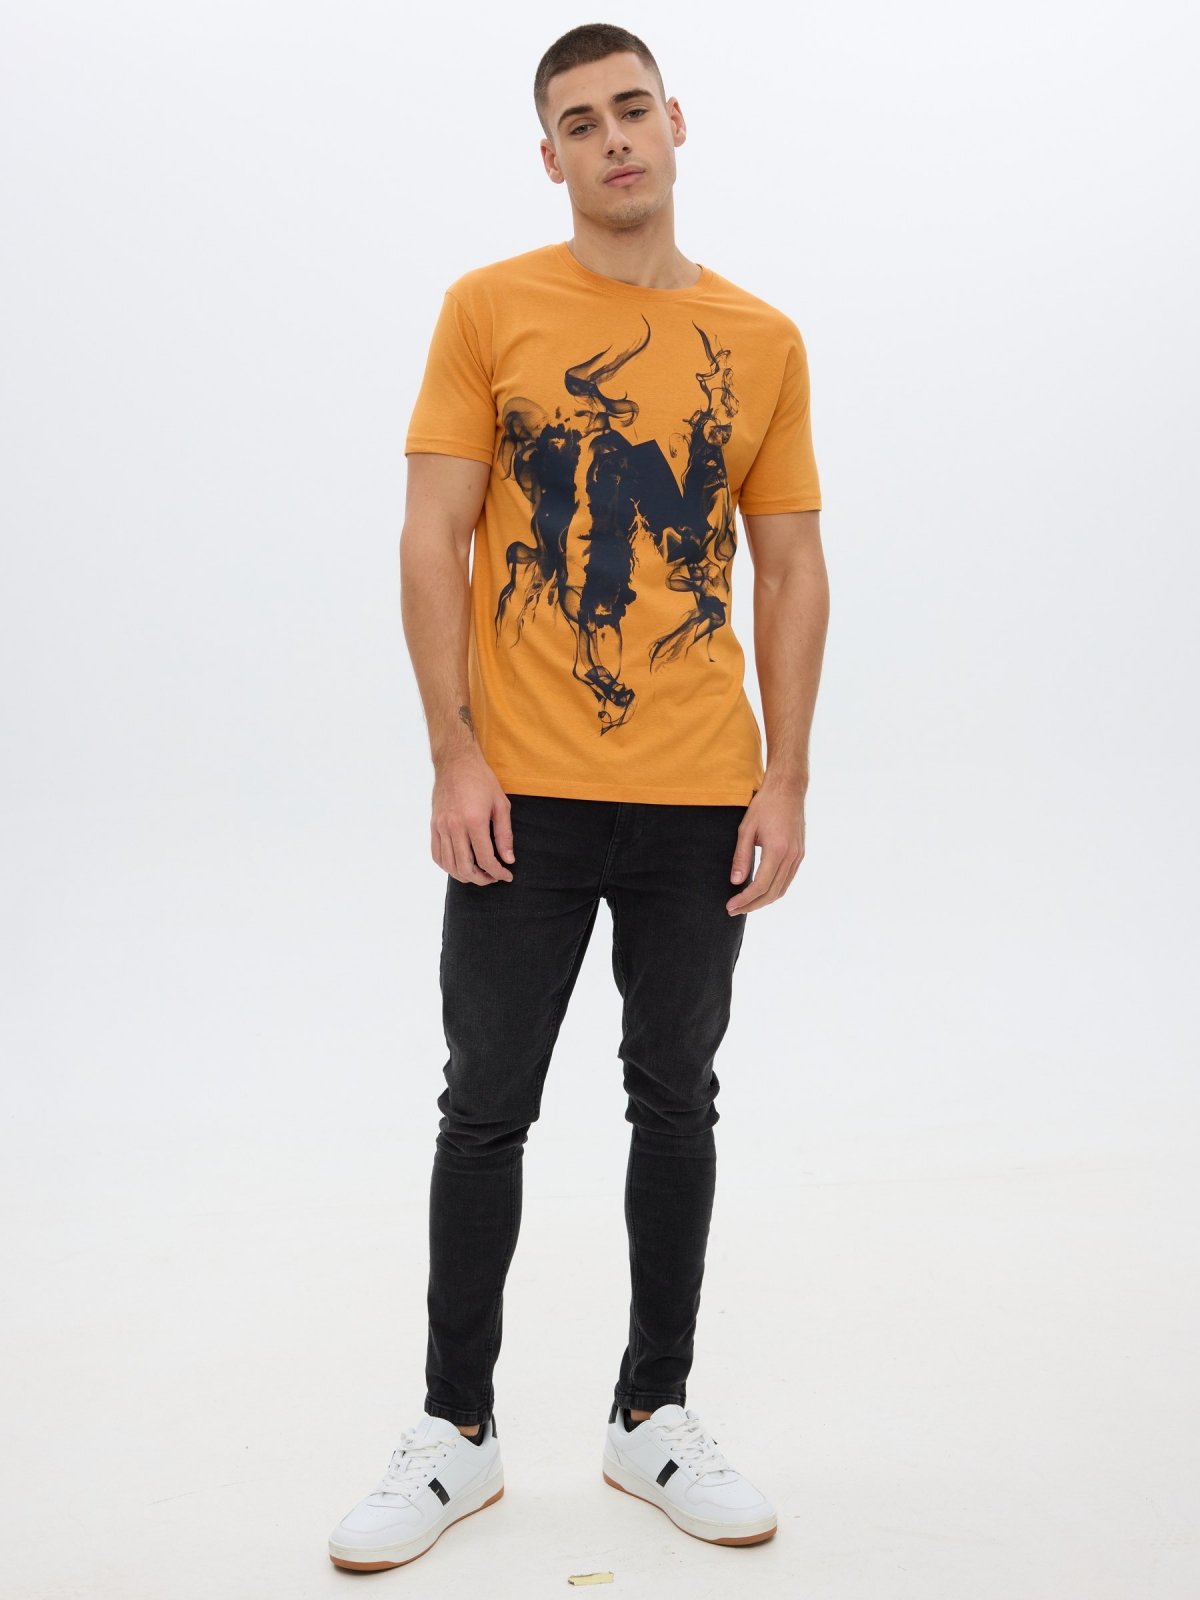 INSIDE printed T-shirt ochre front view